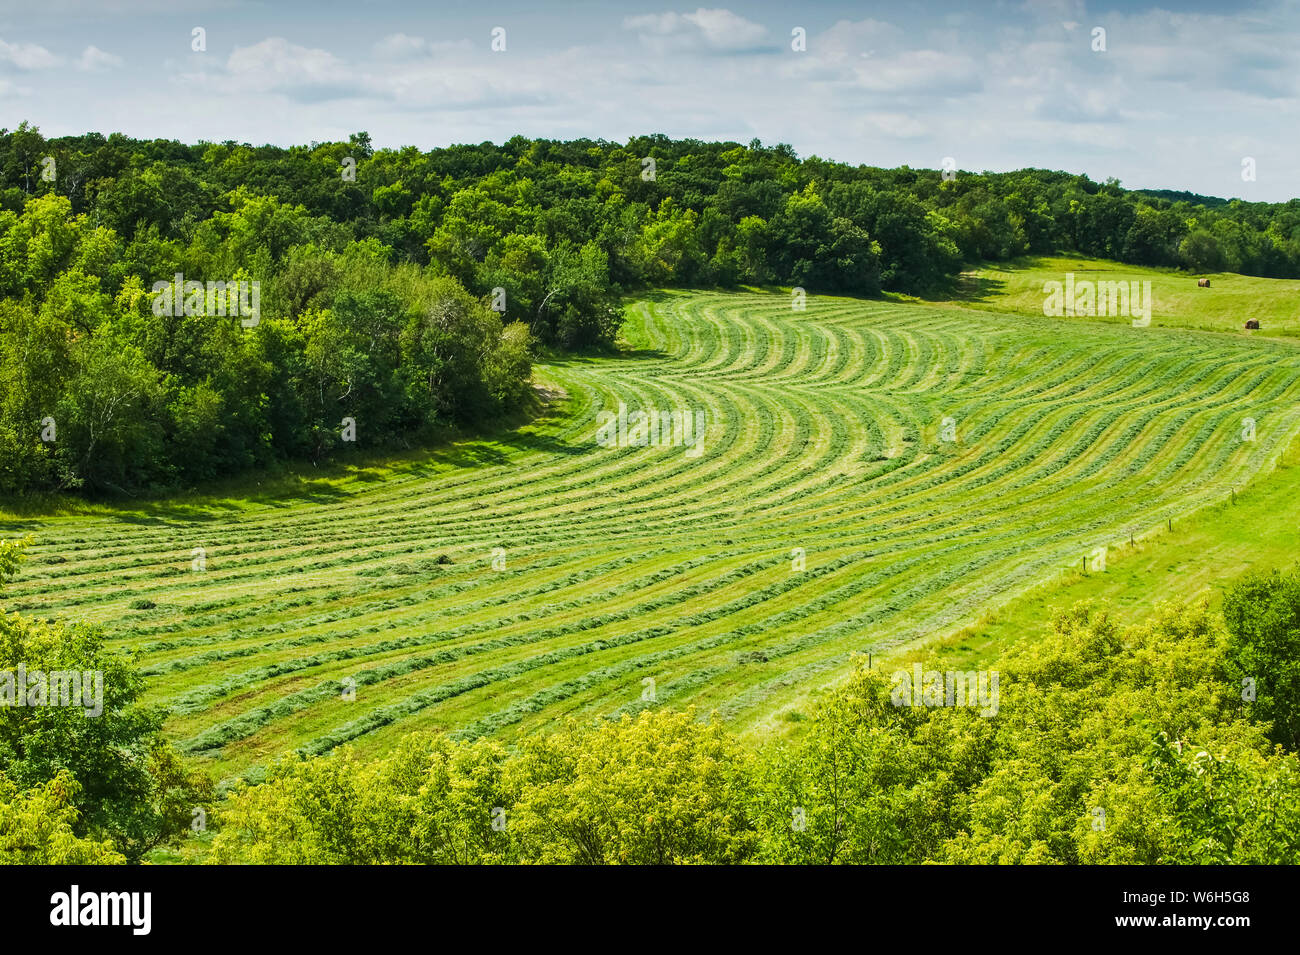 Windrows in a hay field; Manitoba, Canada Stock Photo